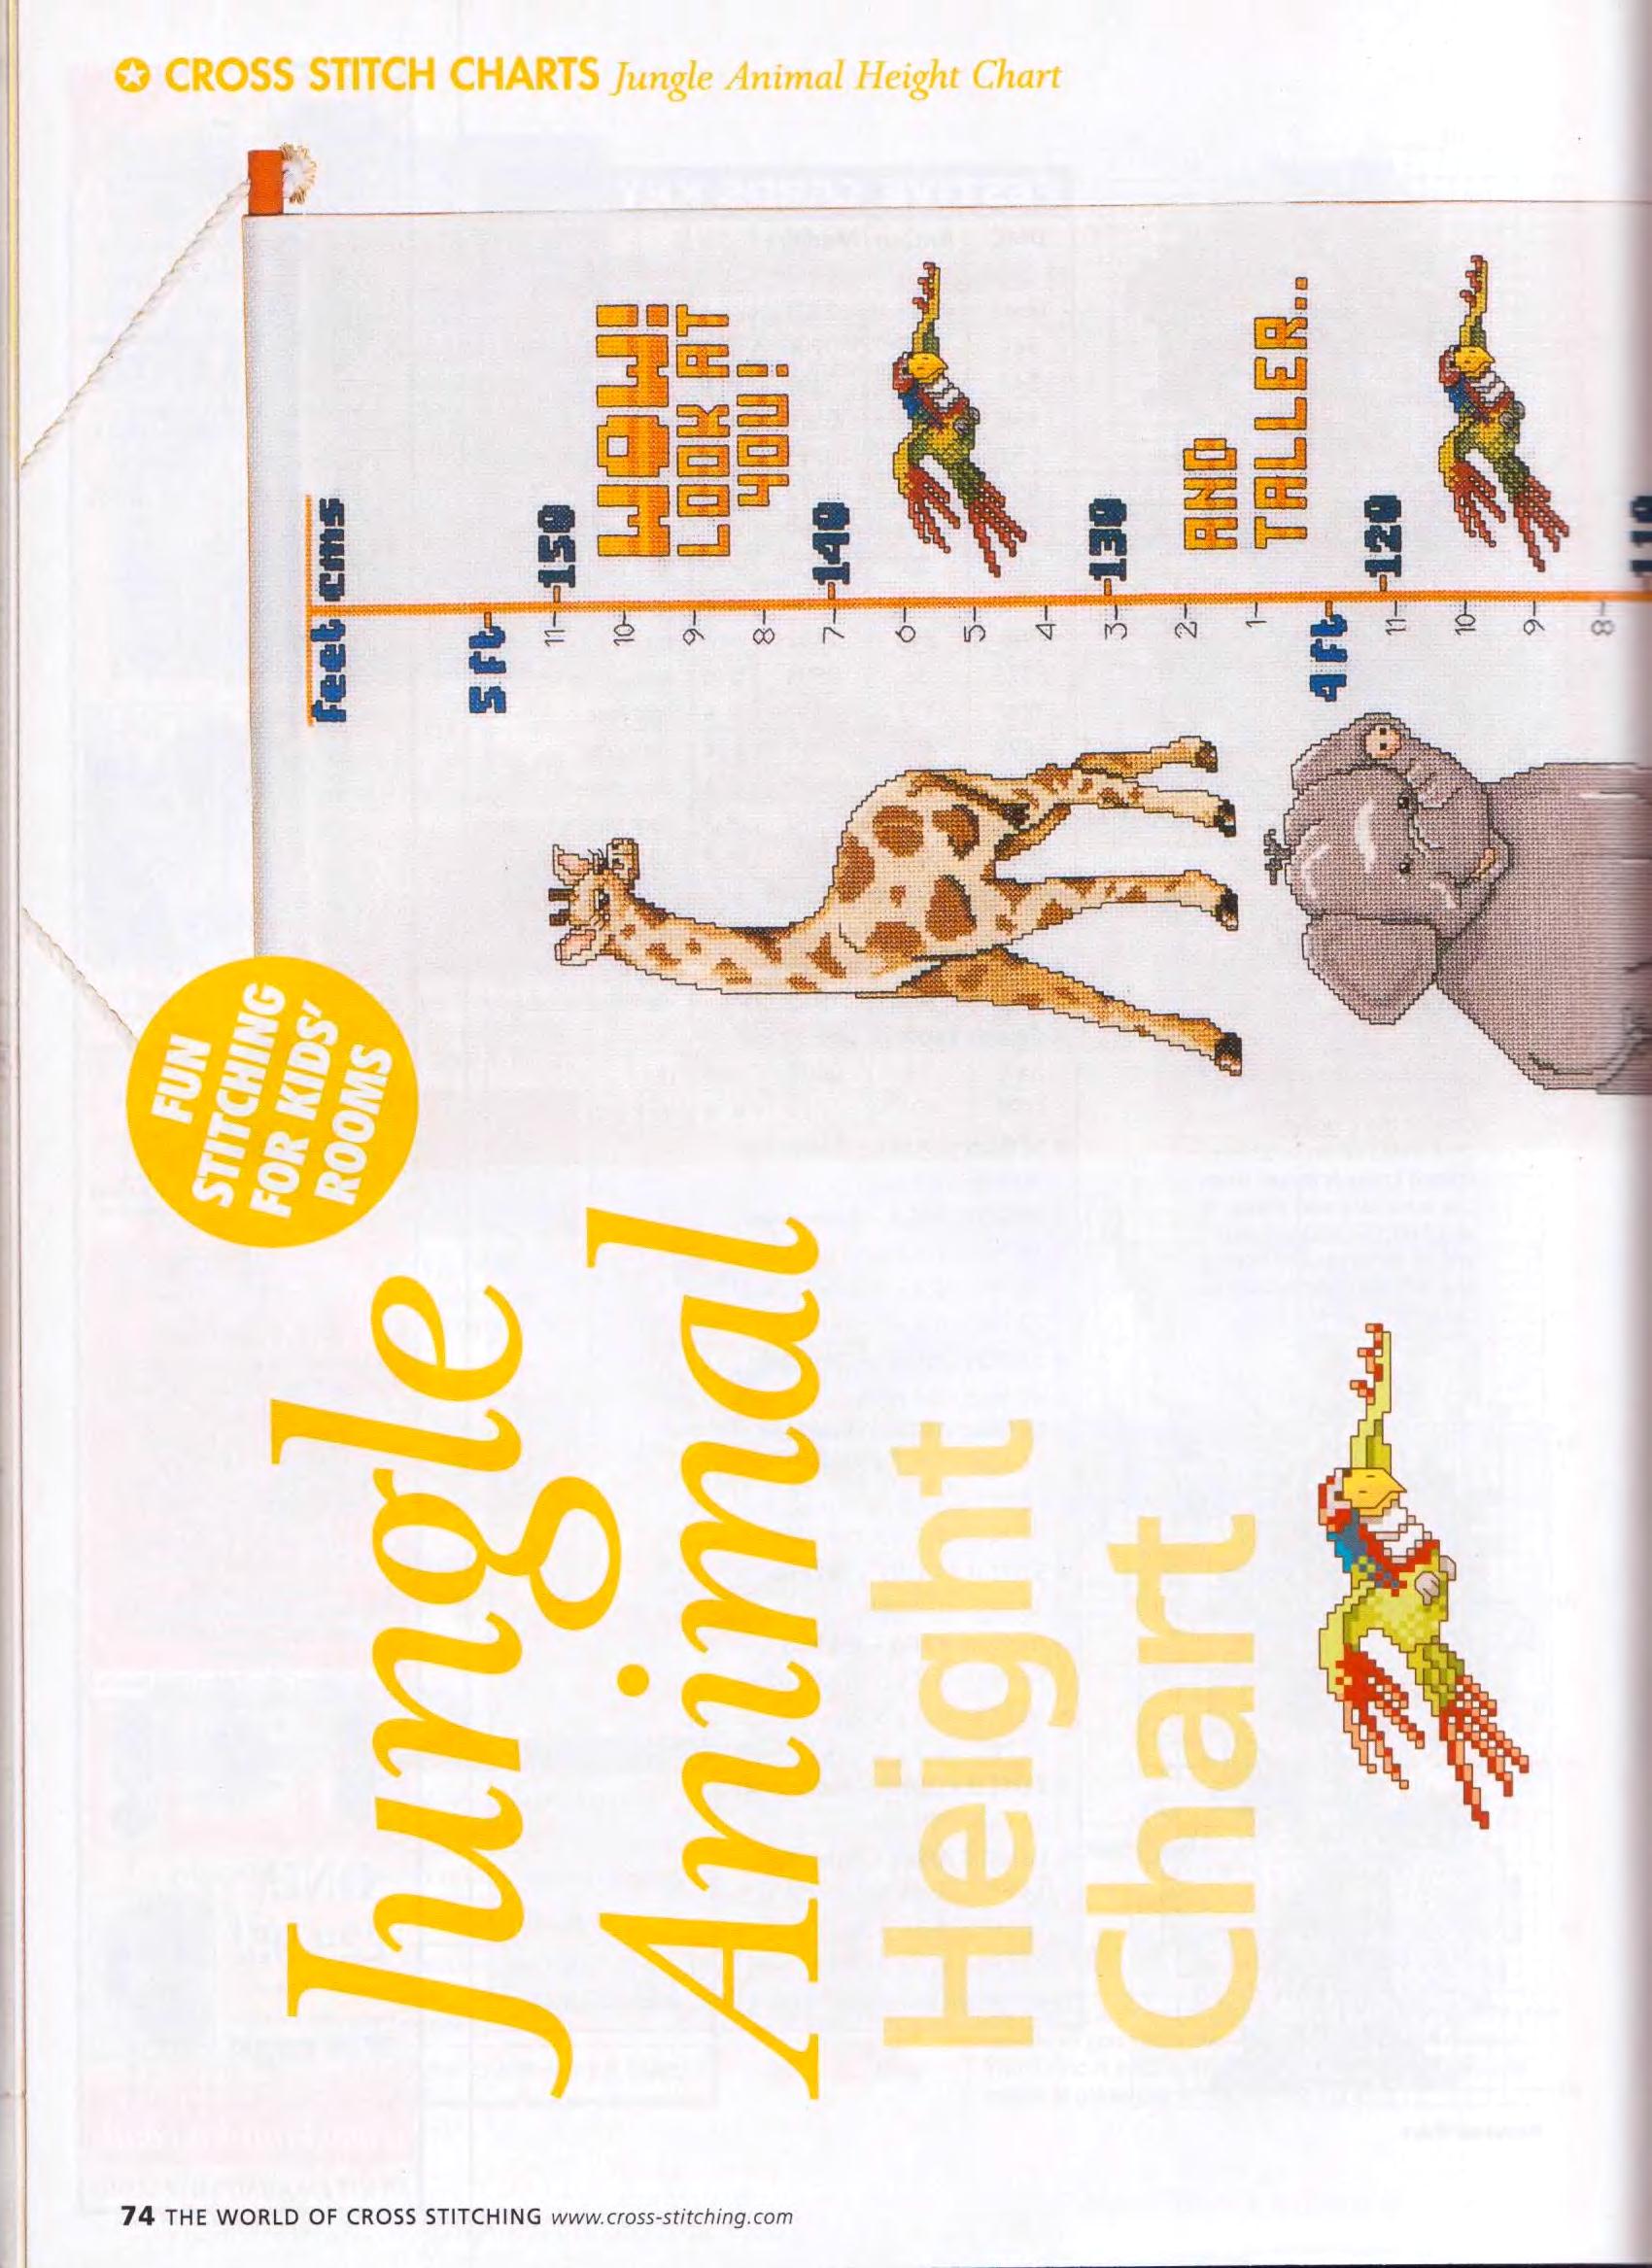 Height chart with jungle animals (1)